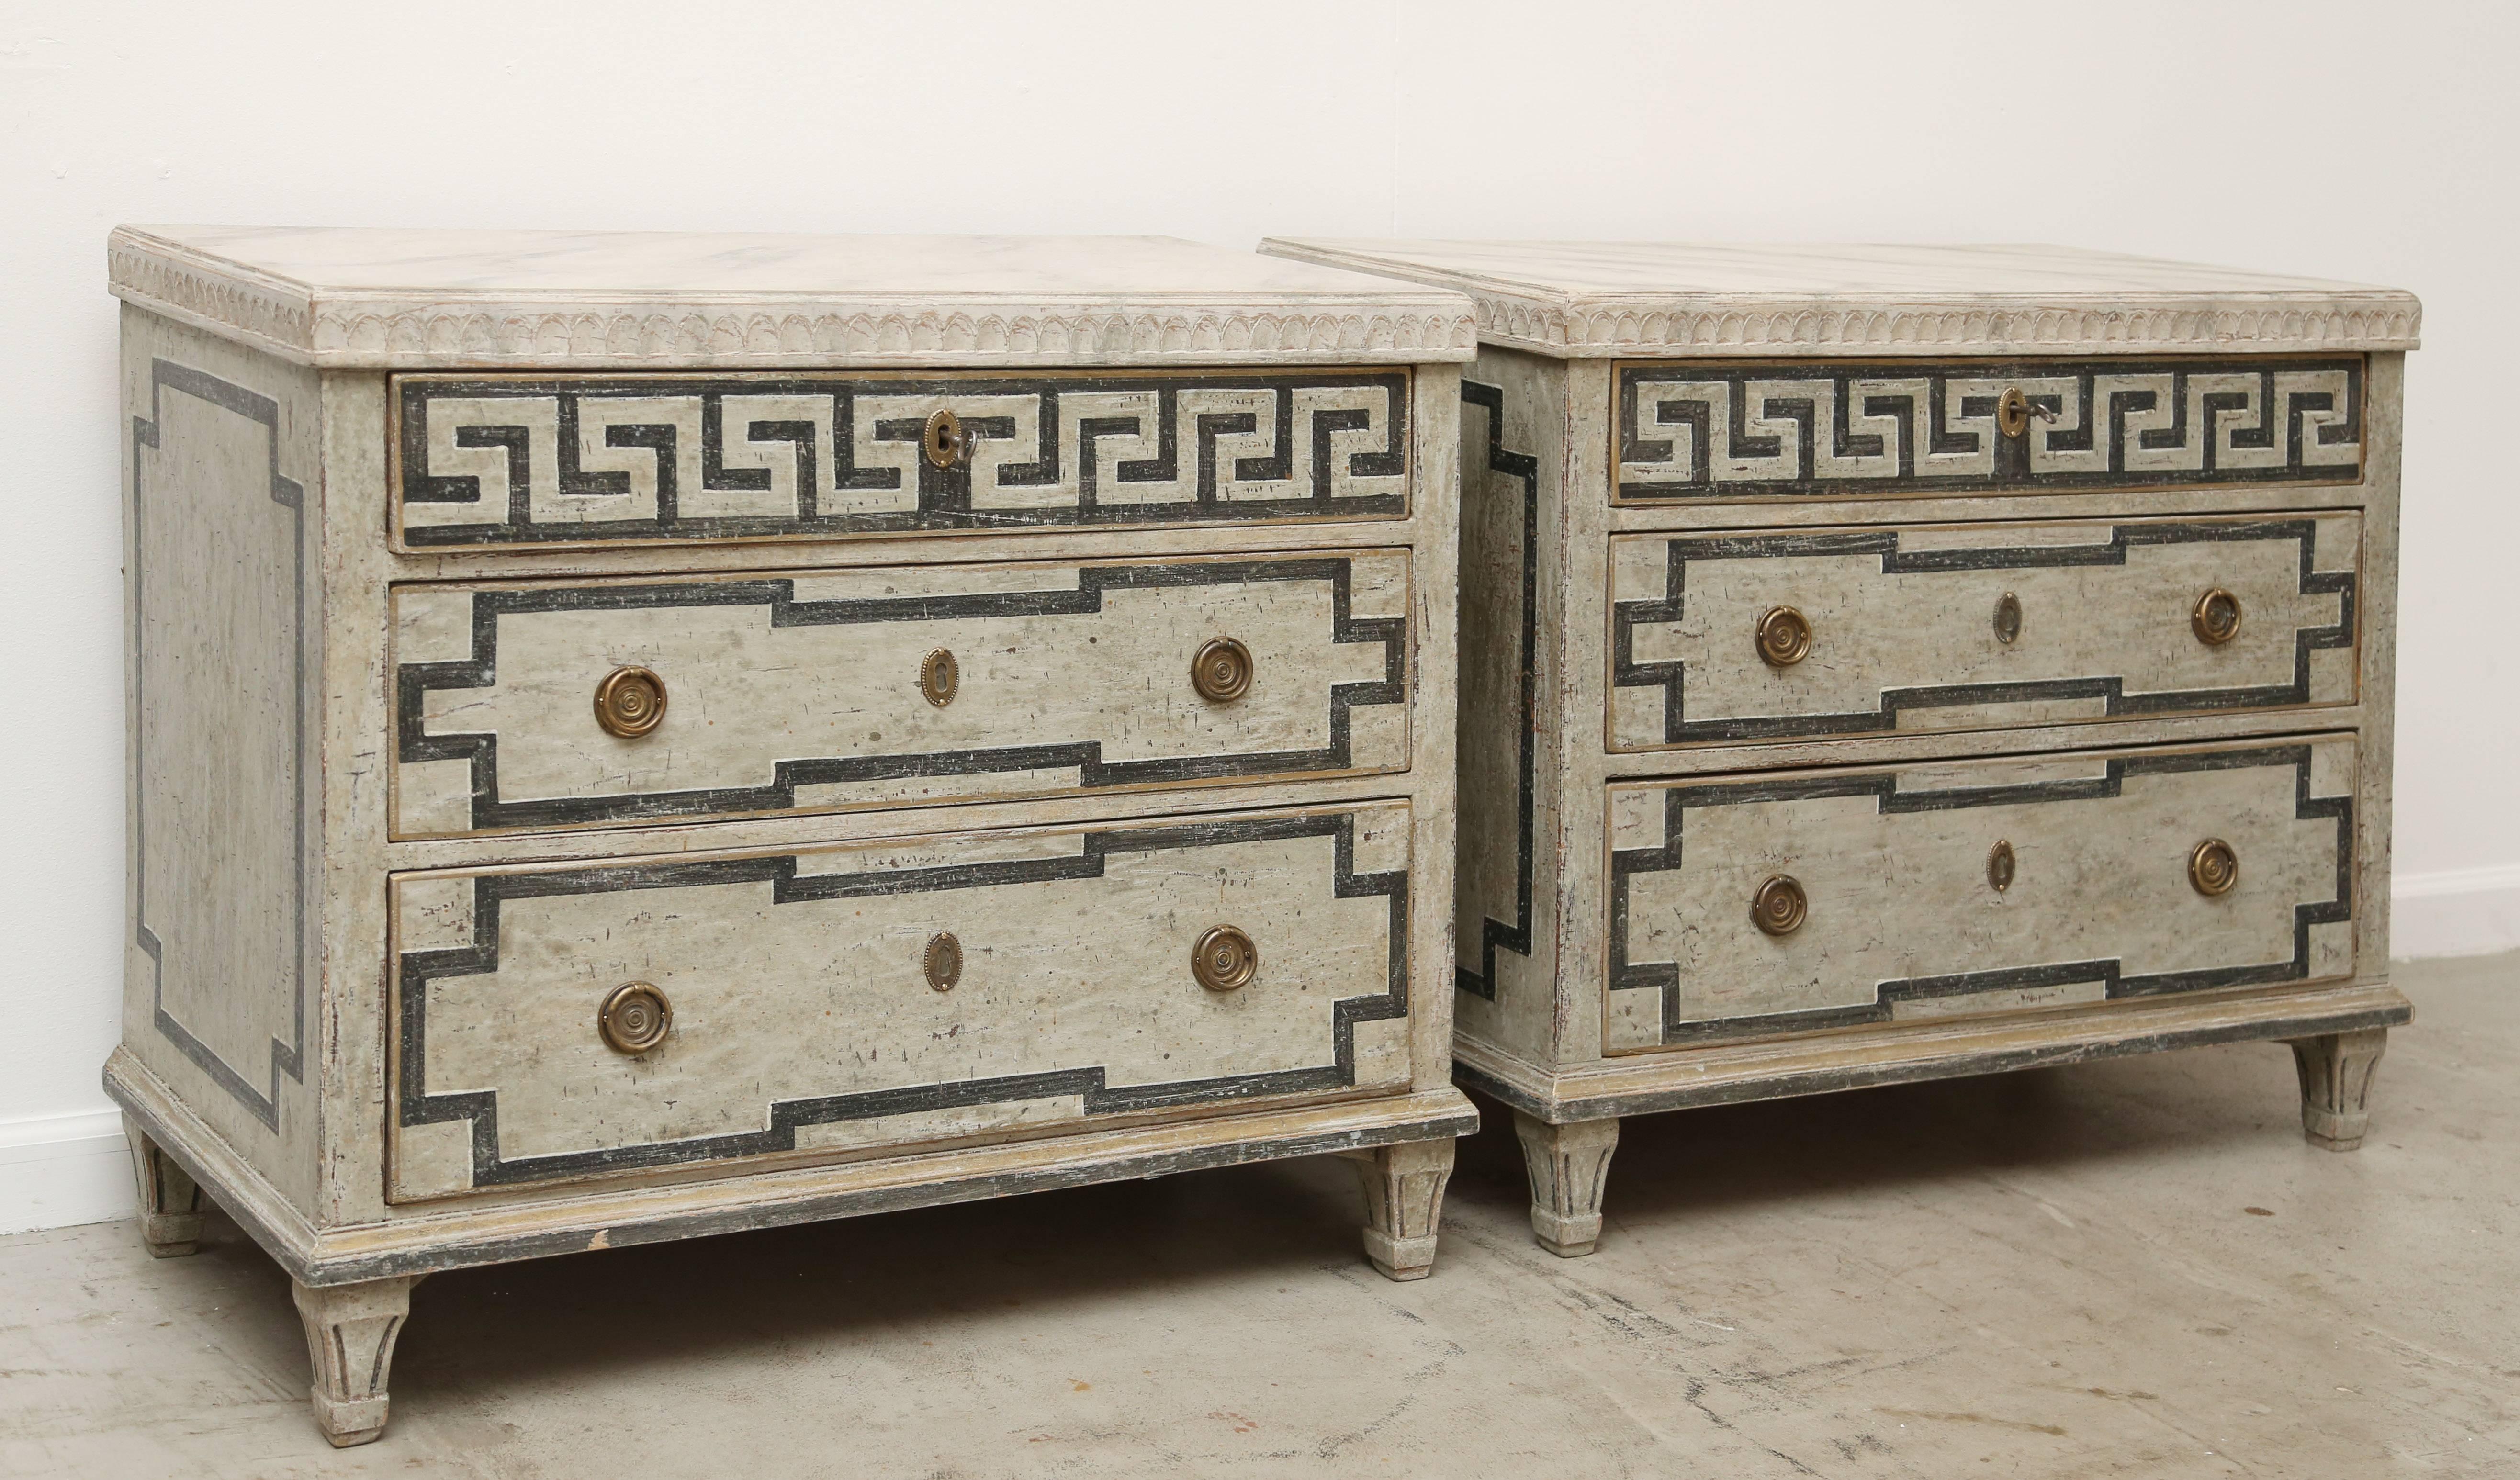 Pair Antique Swedish Gustavian Style very decorative painted chests with
black Greek Key motif on the top drawer and black linear panels on the lower drawers and sides, the background color is Swedish distressed gray. Top is painted a faux gray